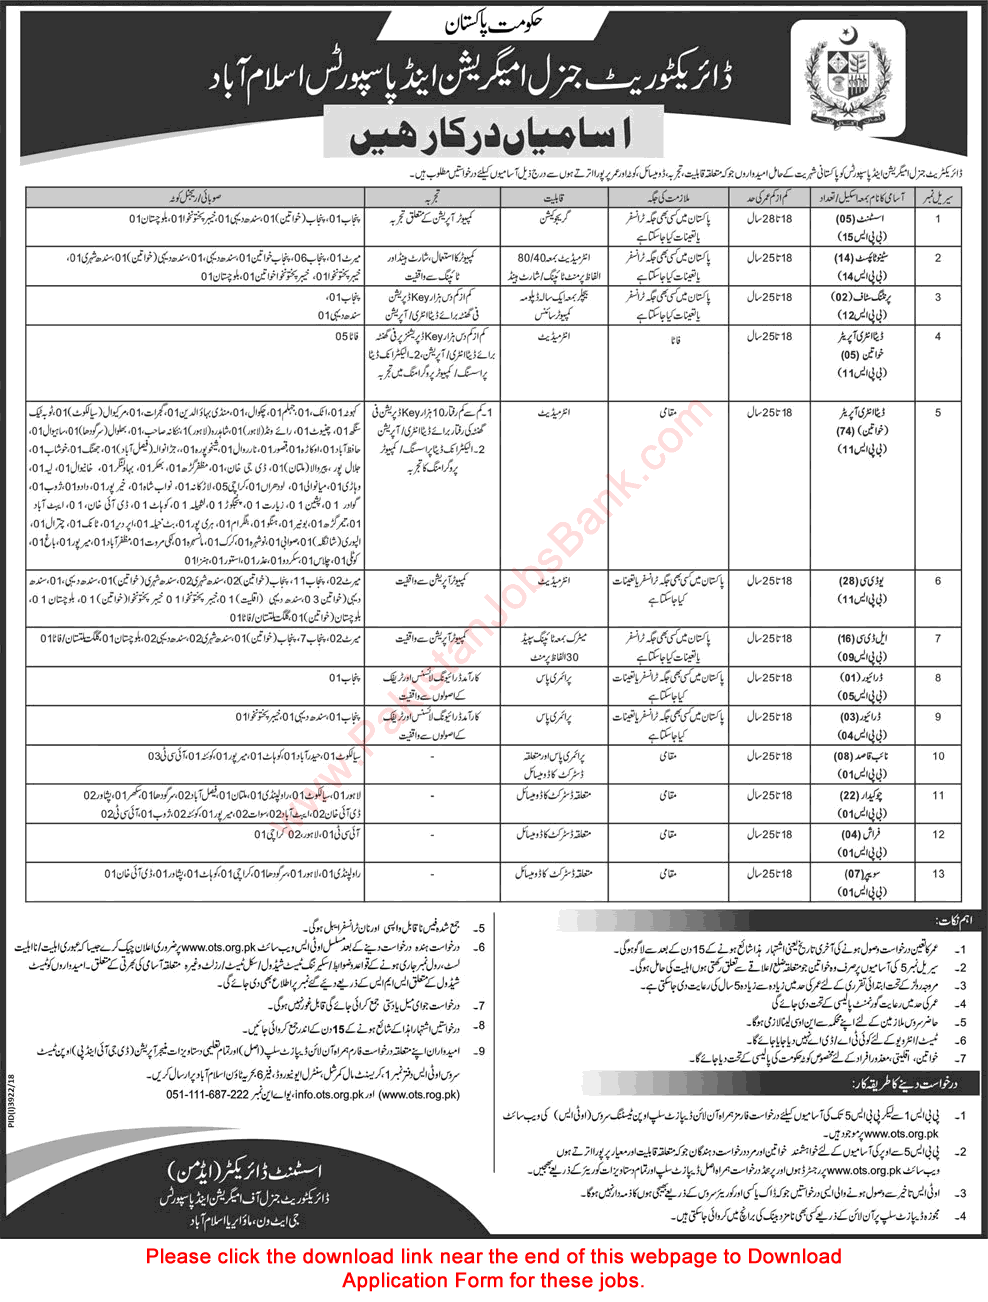 Directorate General of Immigration and Passports Jobs 2019 February OTS Application Form Download Latest